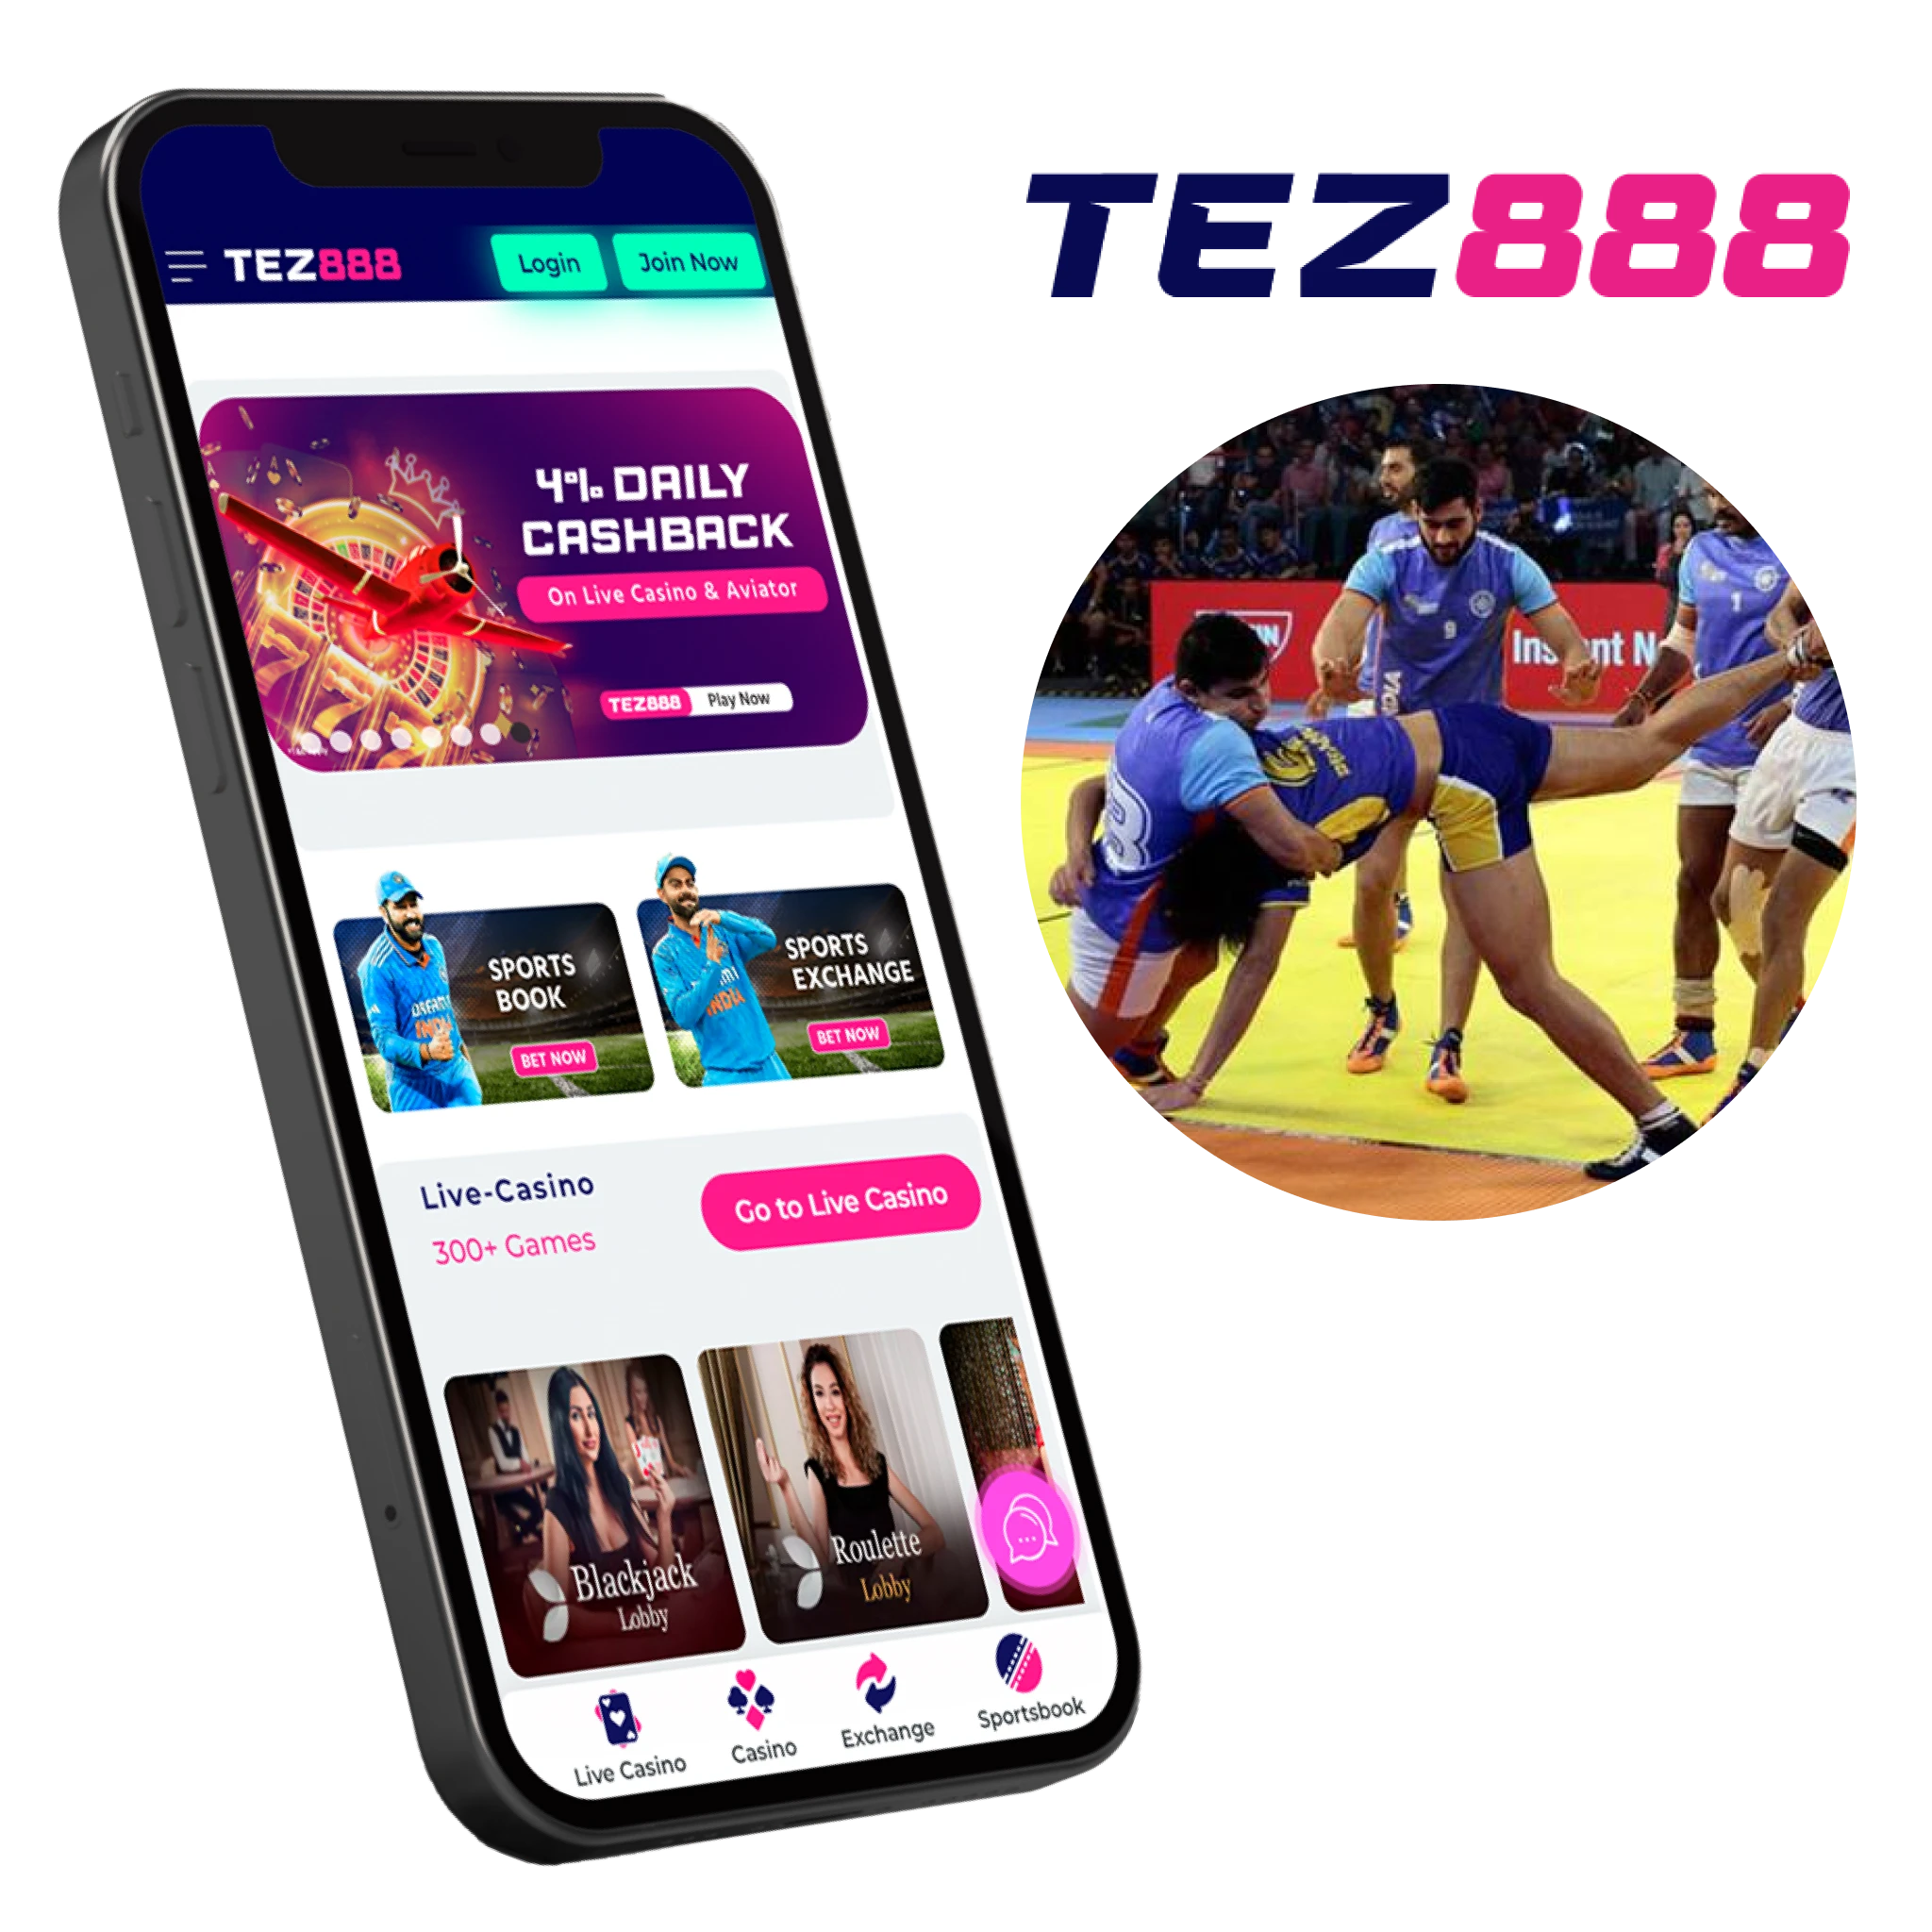 Tez888 app presents a compelling option for Kabaddi fans, with its simple interface and diverse betting options.